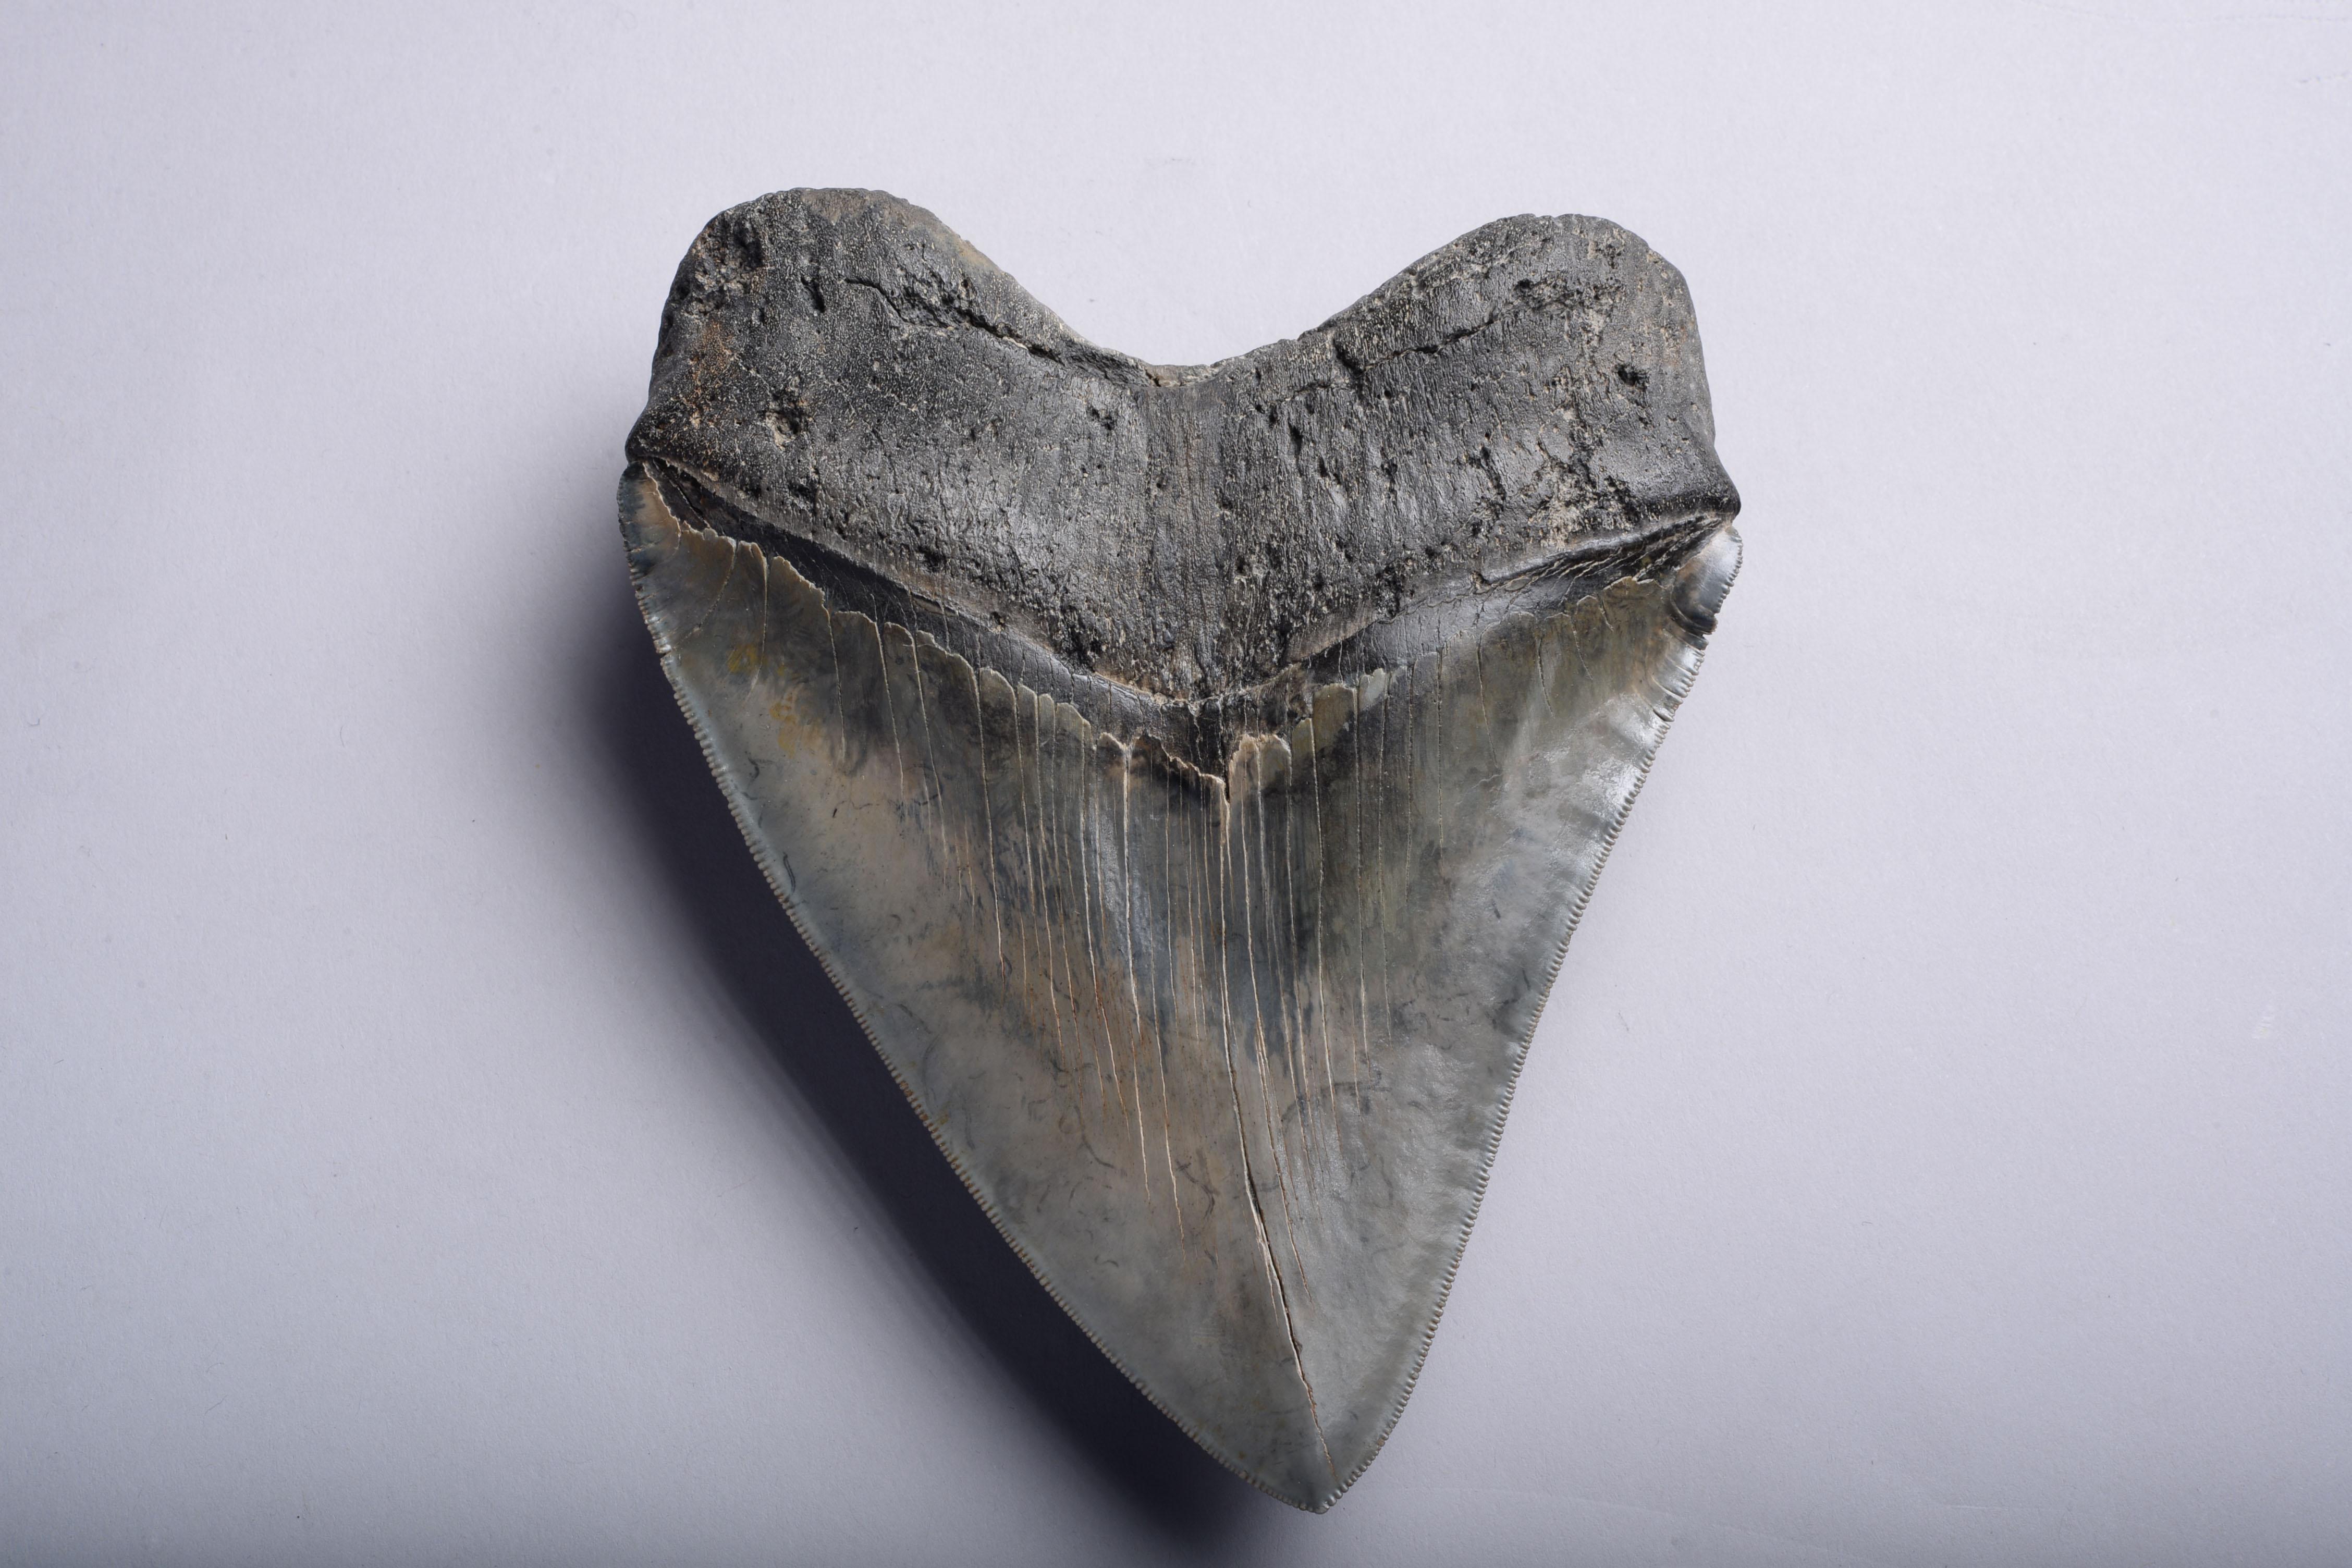 American Enormous Megalodon Shark Tooth Fossil